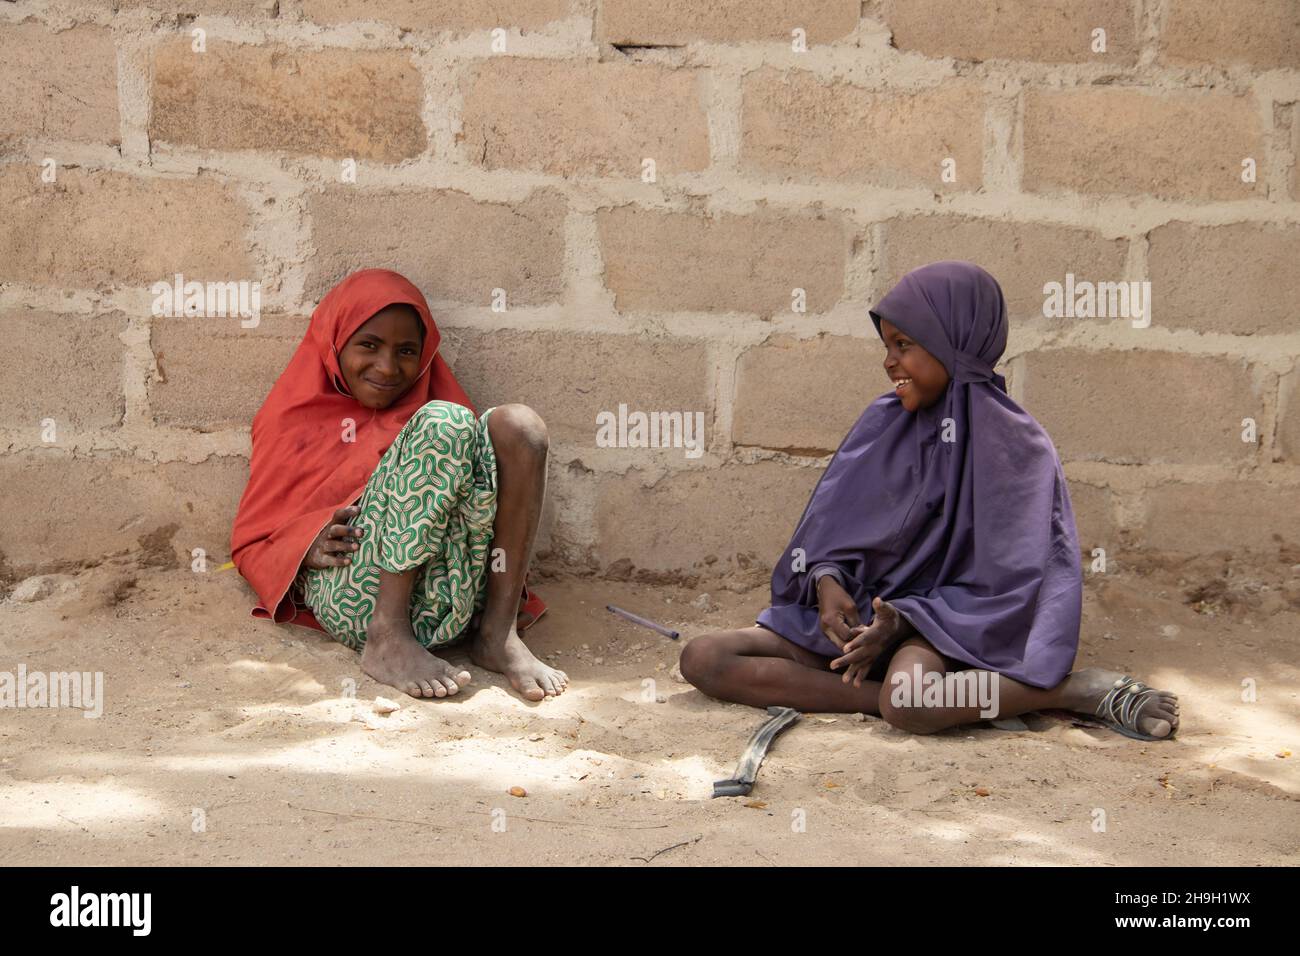 Two sisters dressed in traditional colorful wardrobe seating at the ground, Nigeria, Maiduguri Stock Photo